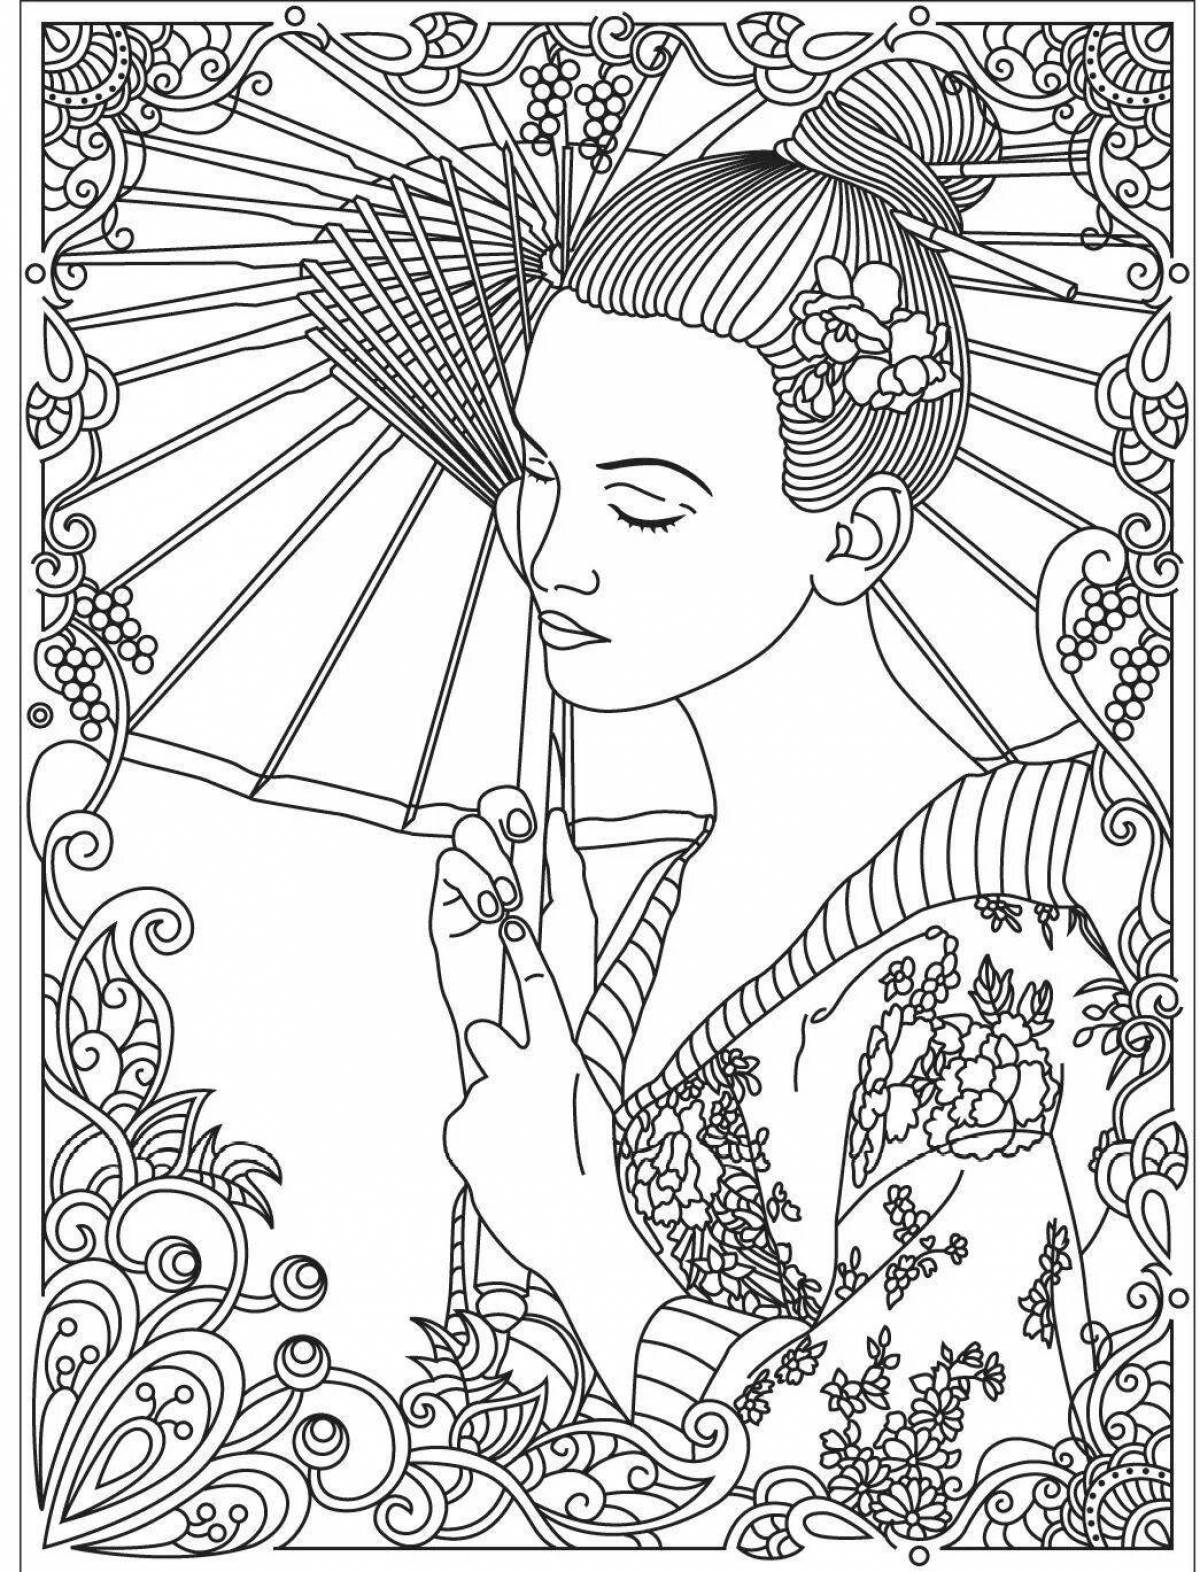 Coloring page adorable japanese motif